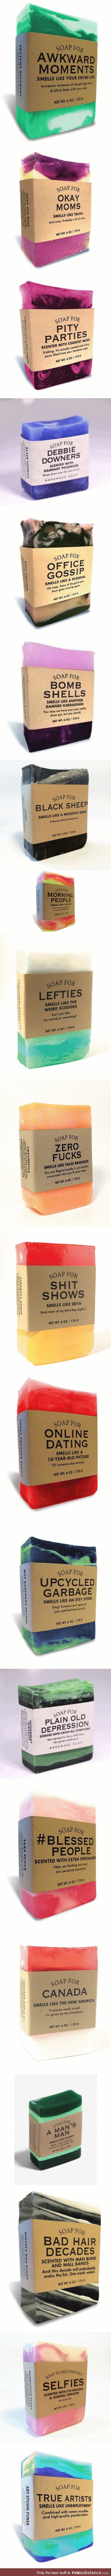 Soaps for every occasion!